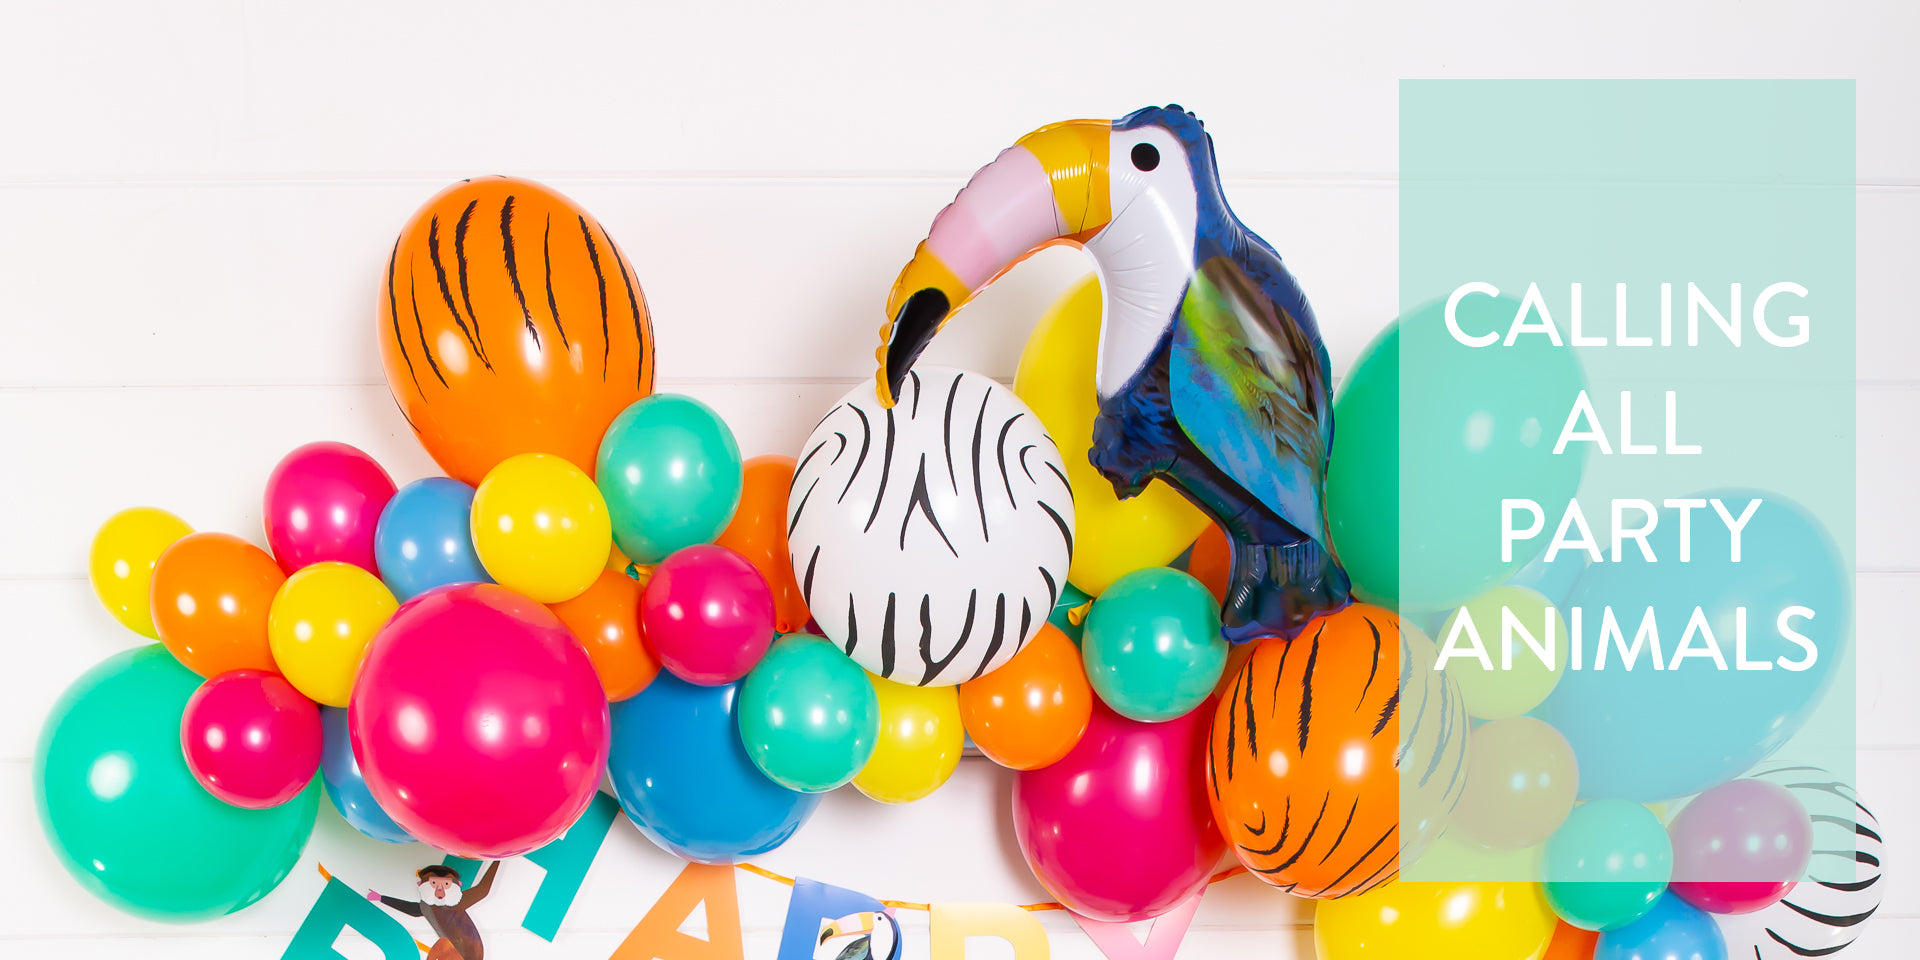 How to Throw a Party Animals Theme Party